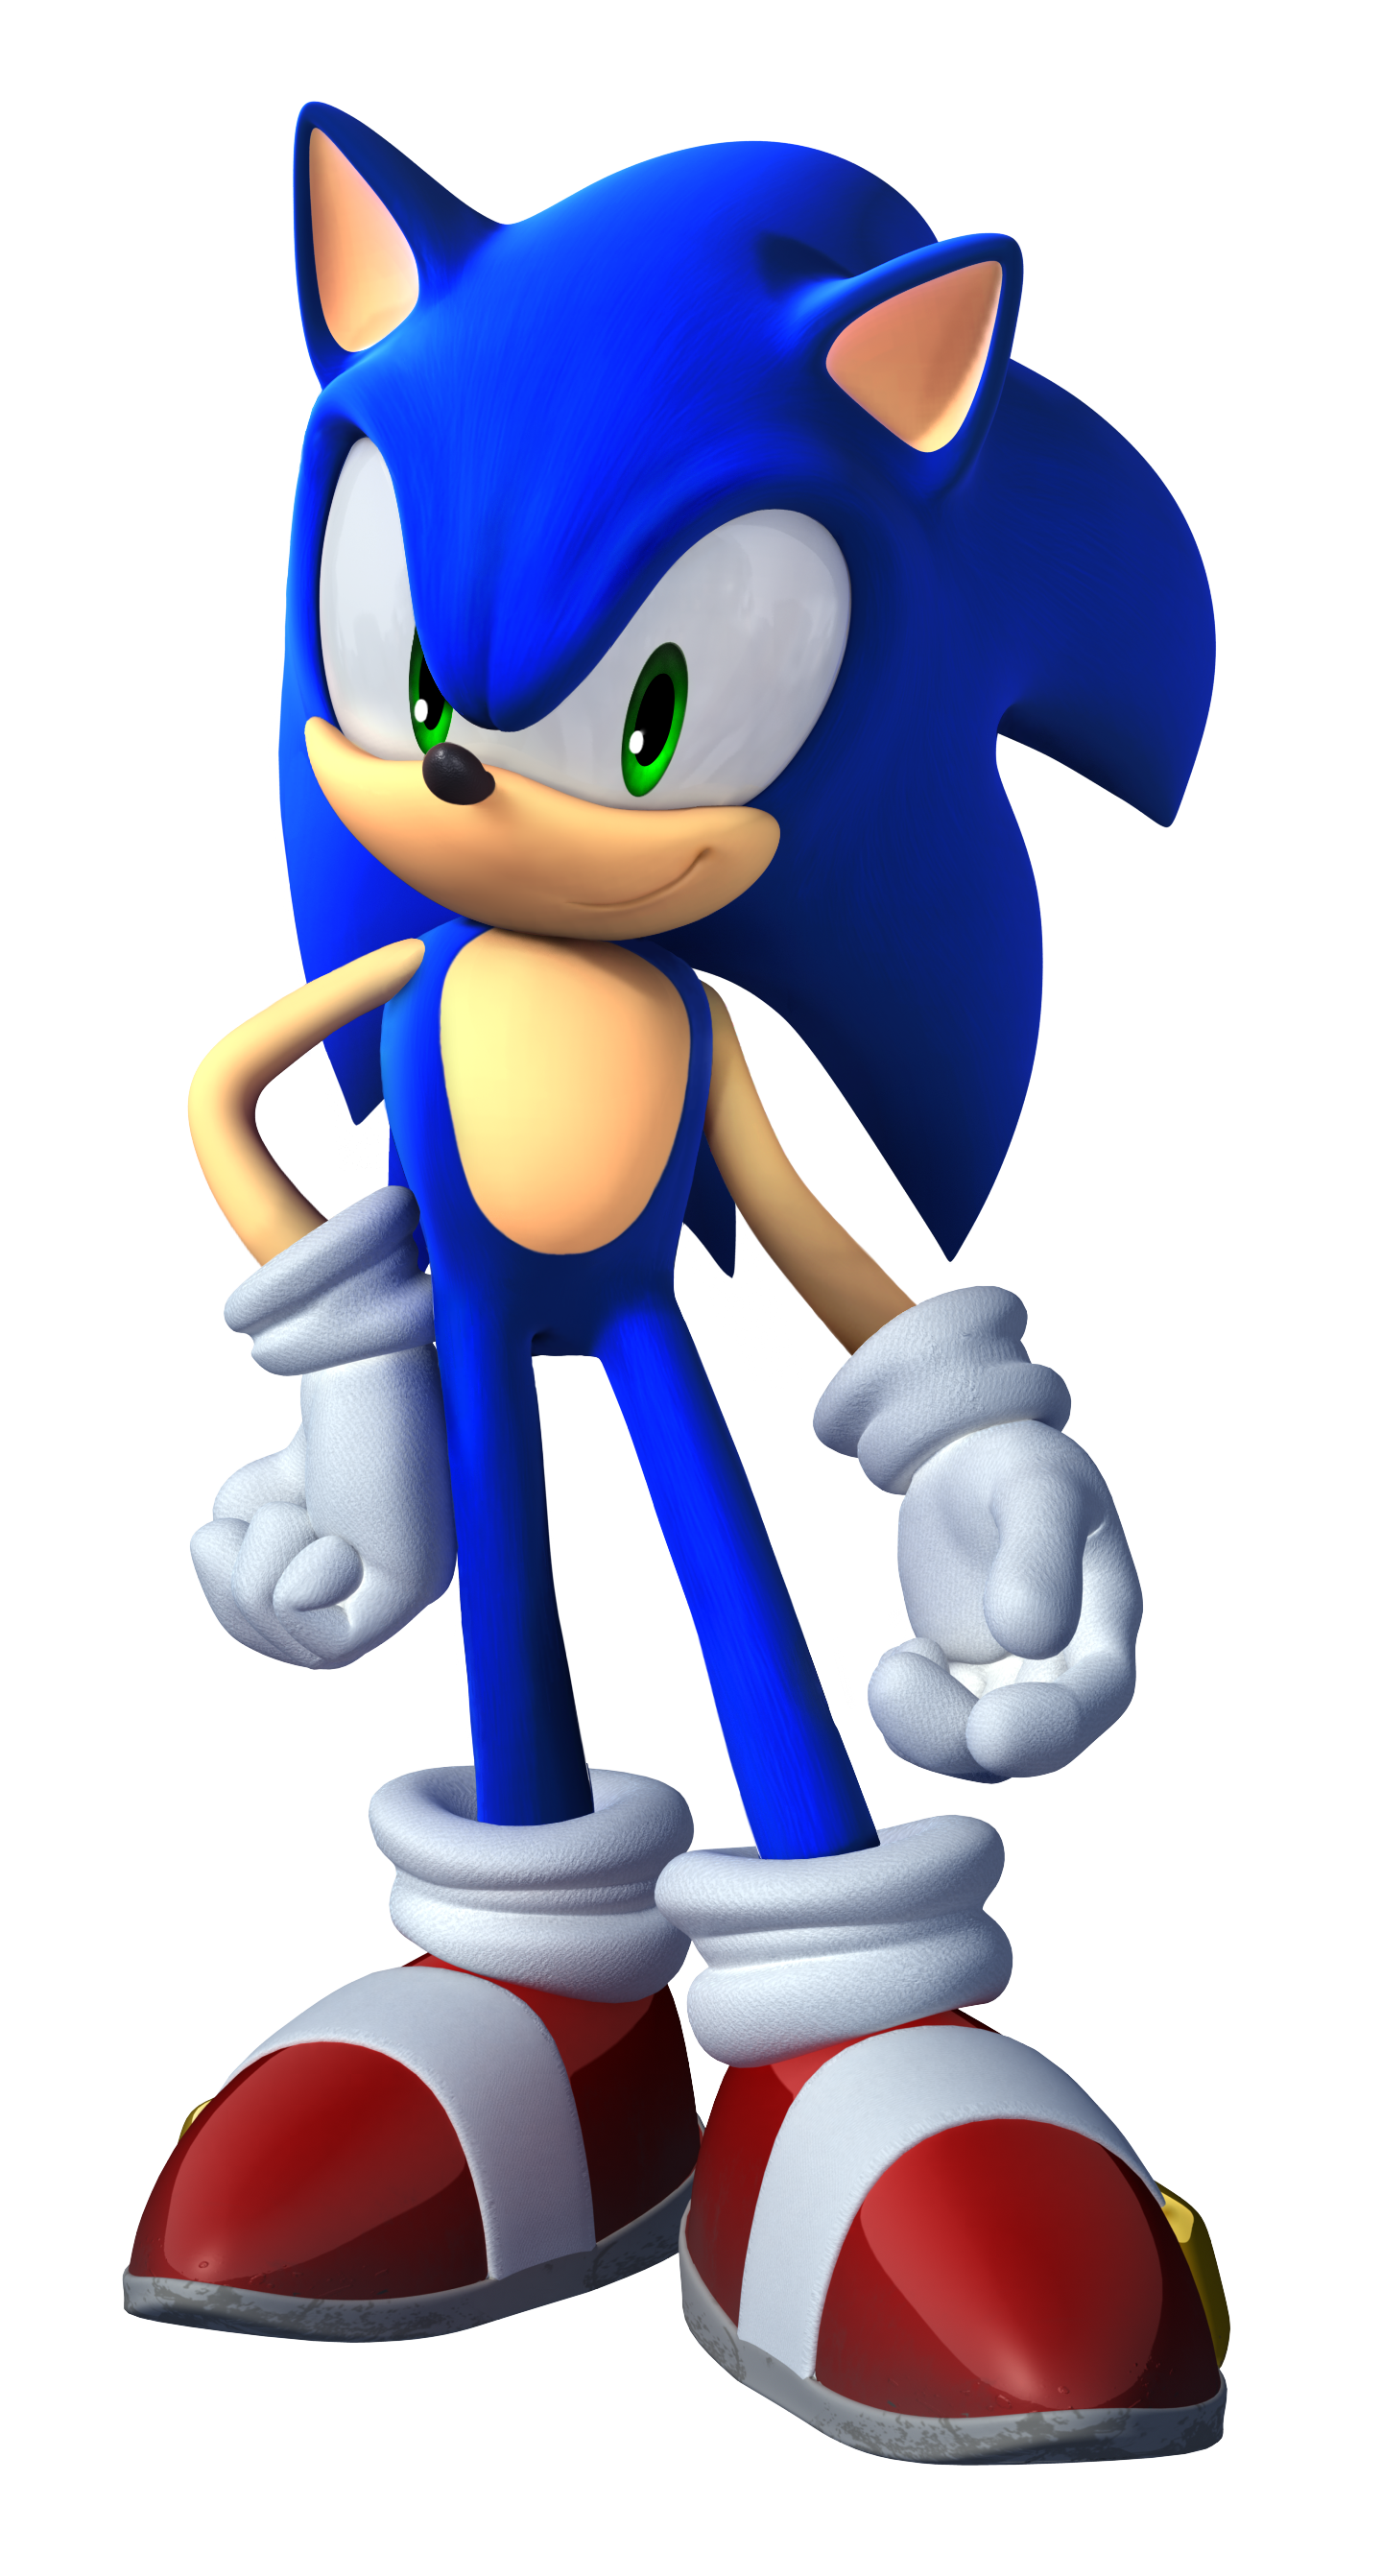 An official render of Sonic the Hedgehog by SEGA.